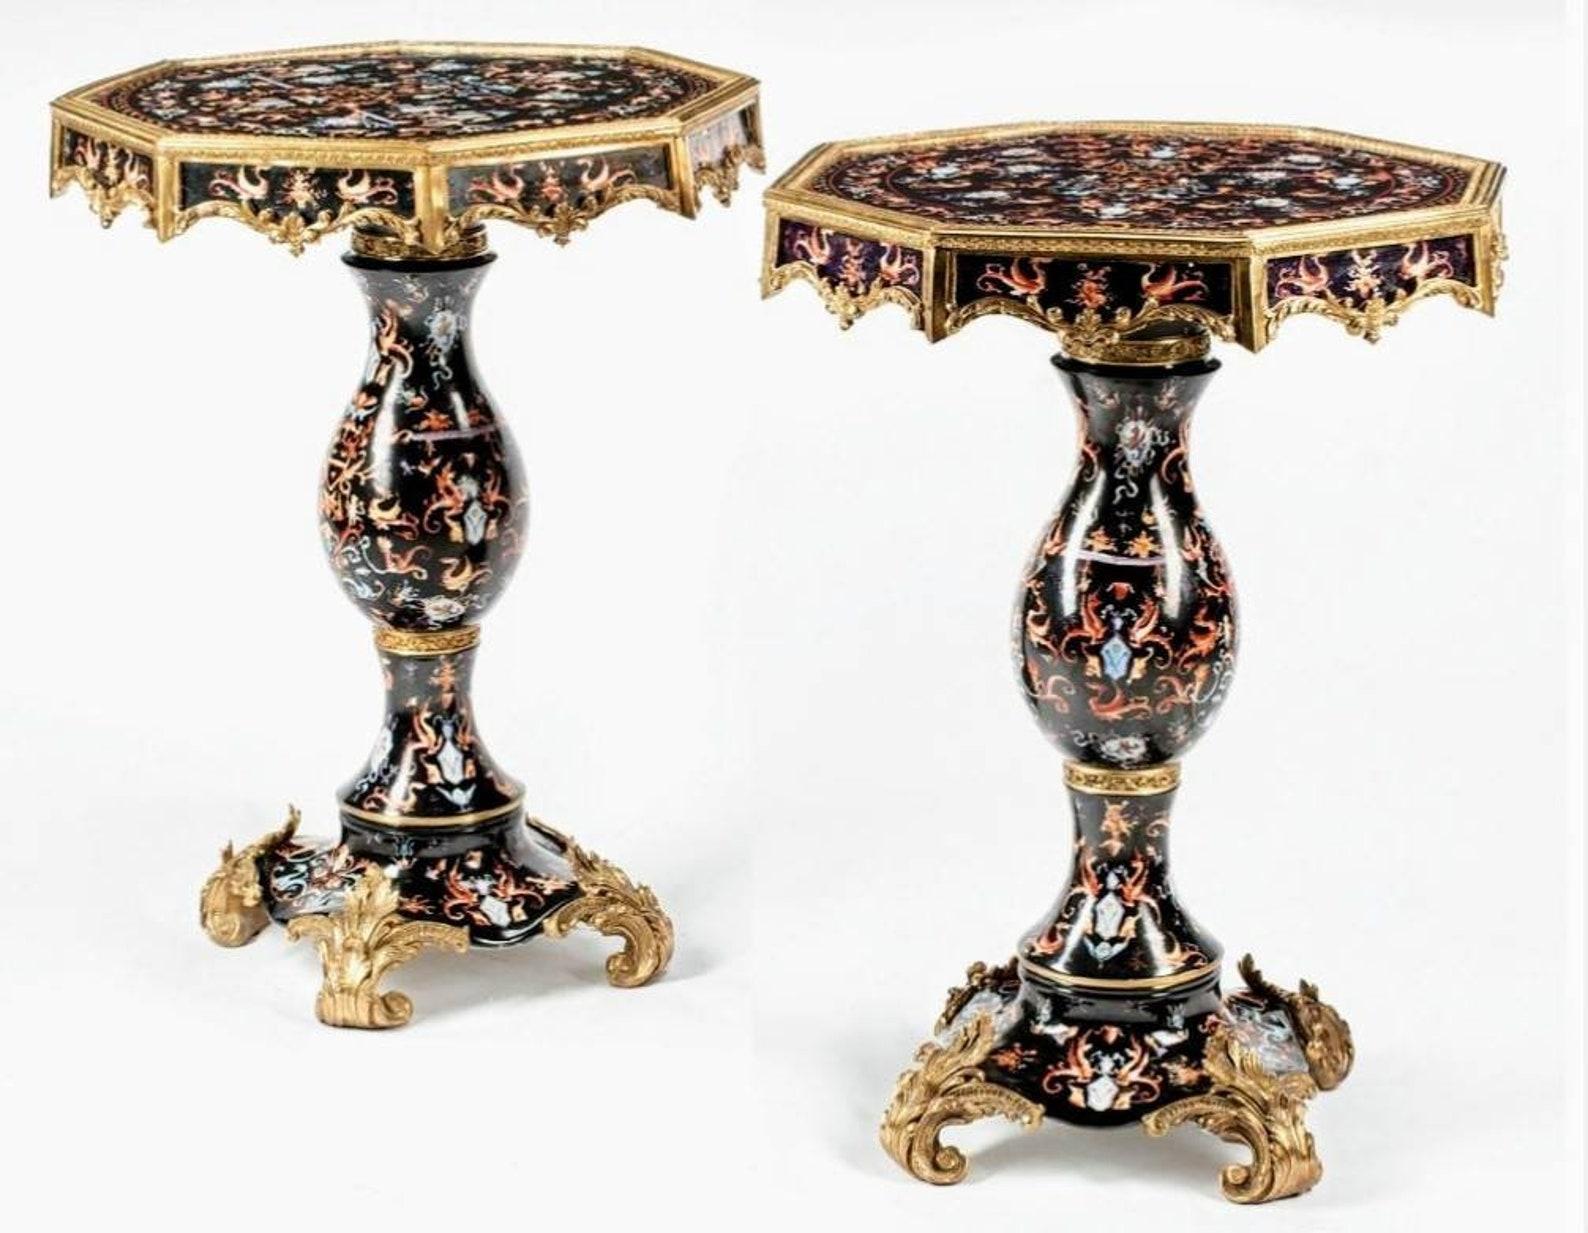 An exceptional pair of stunning, rare, very fine quality French Baroque style gilt bronze mounted polychrome porcelain and lacquer side tables. 

Featuring an octagonal top, heraldic motif, rising on vasiform standard with undulating shaped base,